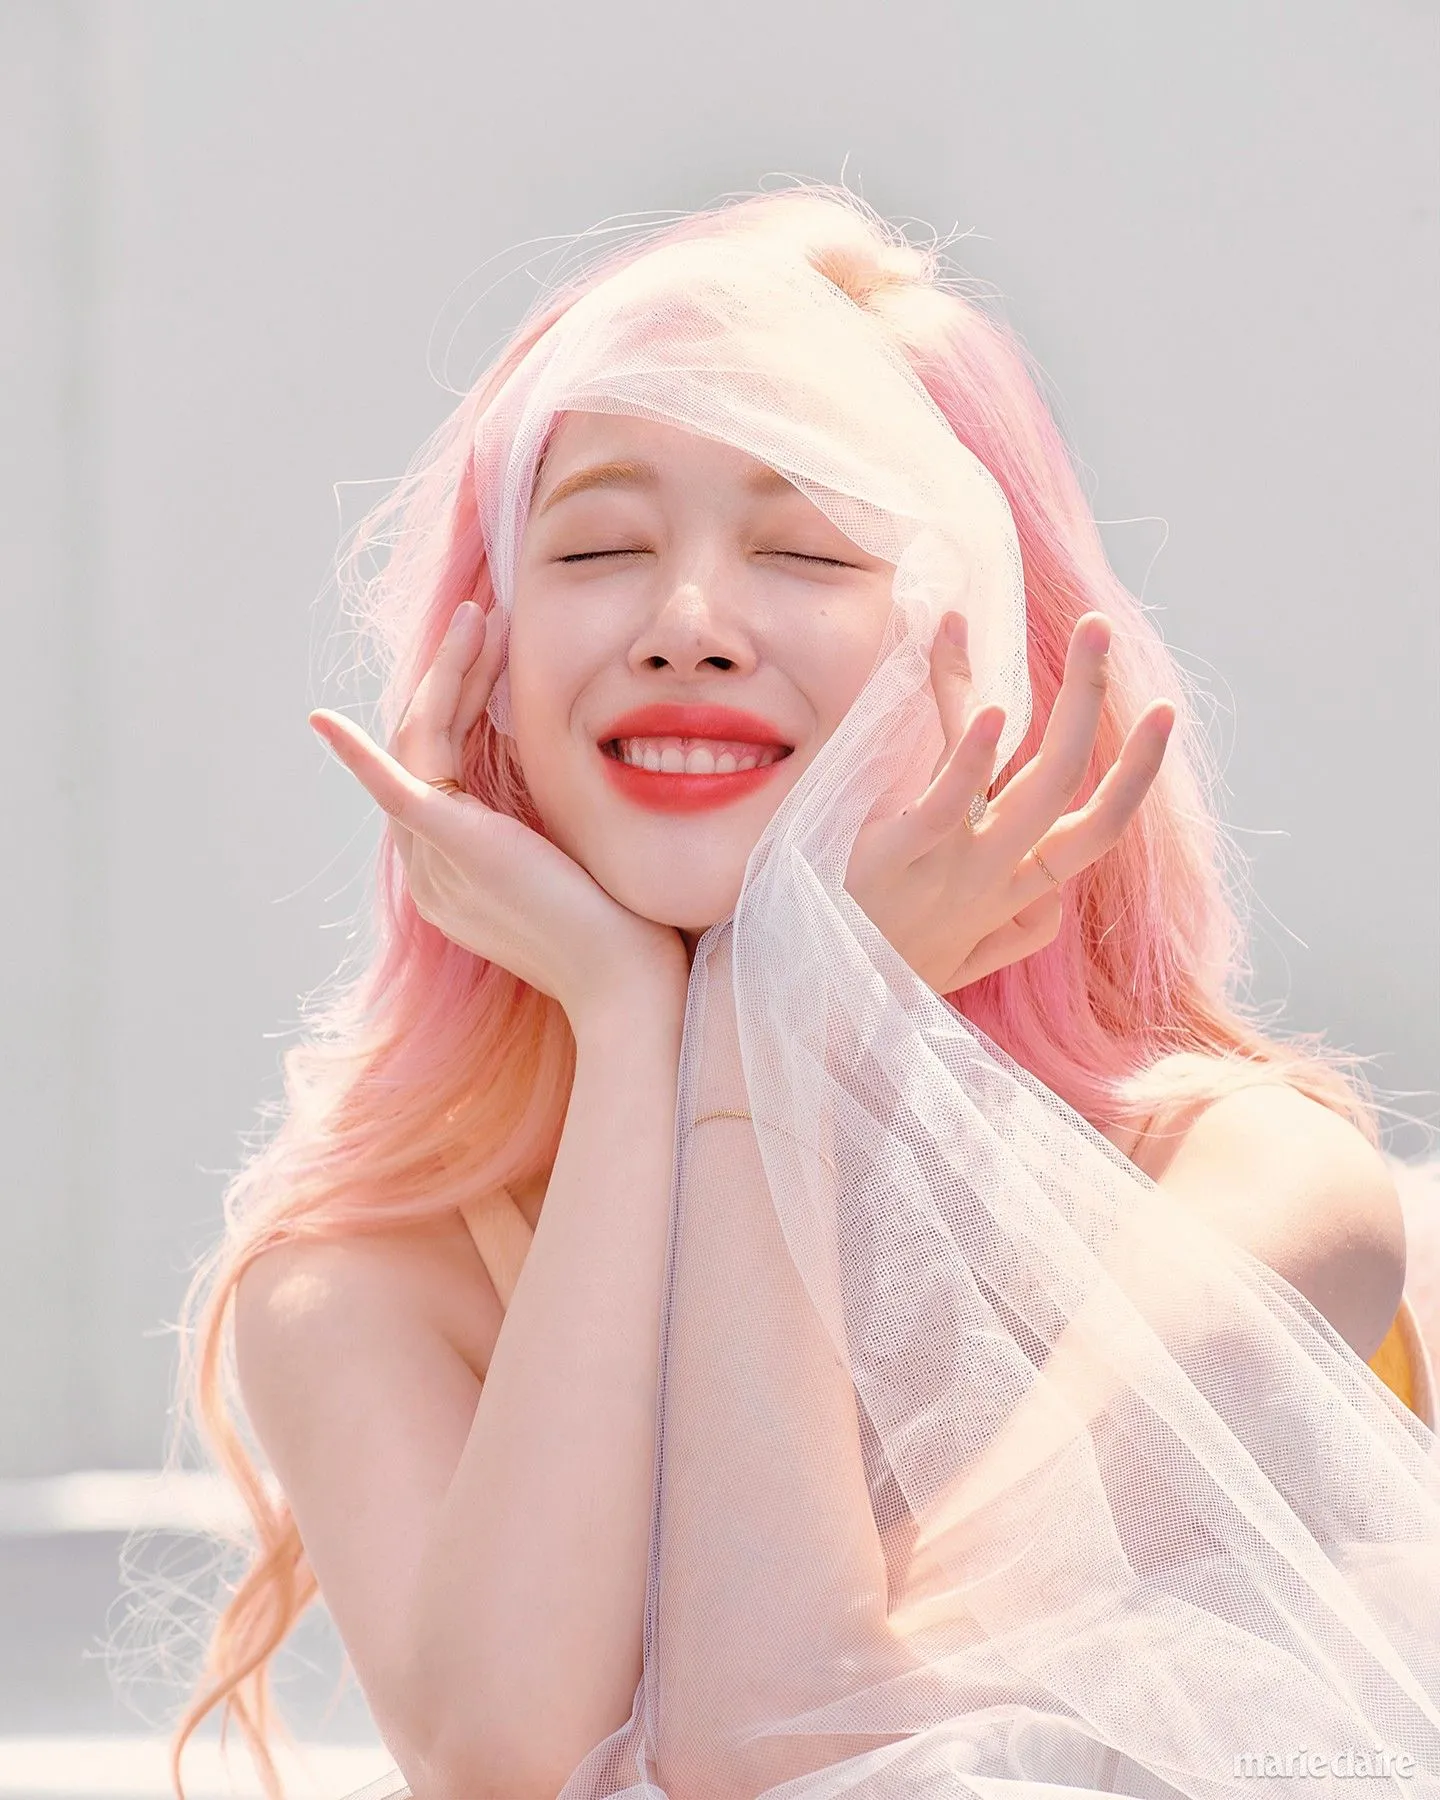 Sulli † profile, age & facts (2023 updated) | Kpopping